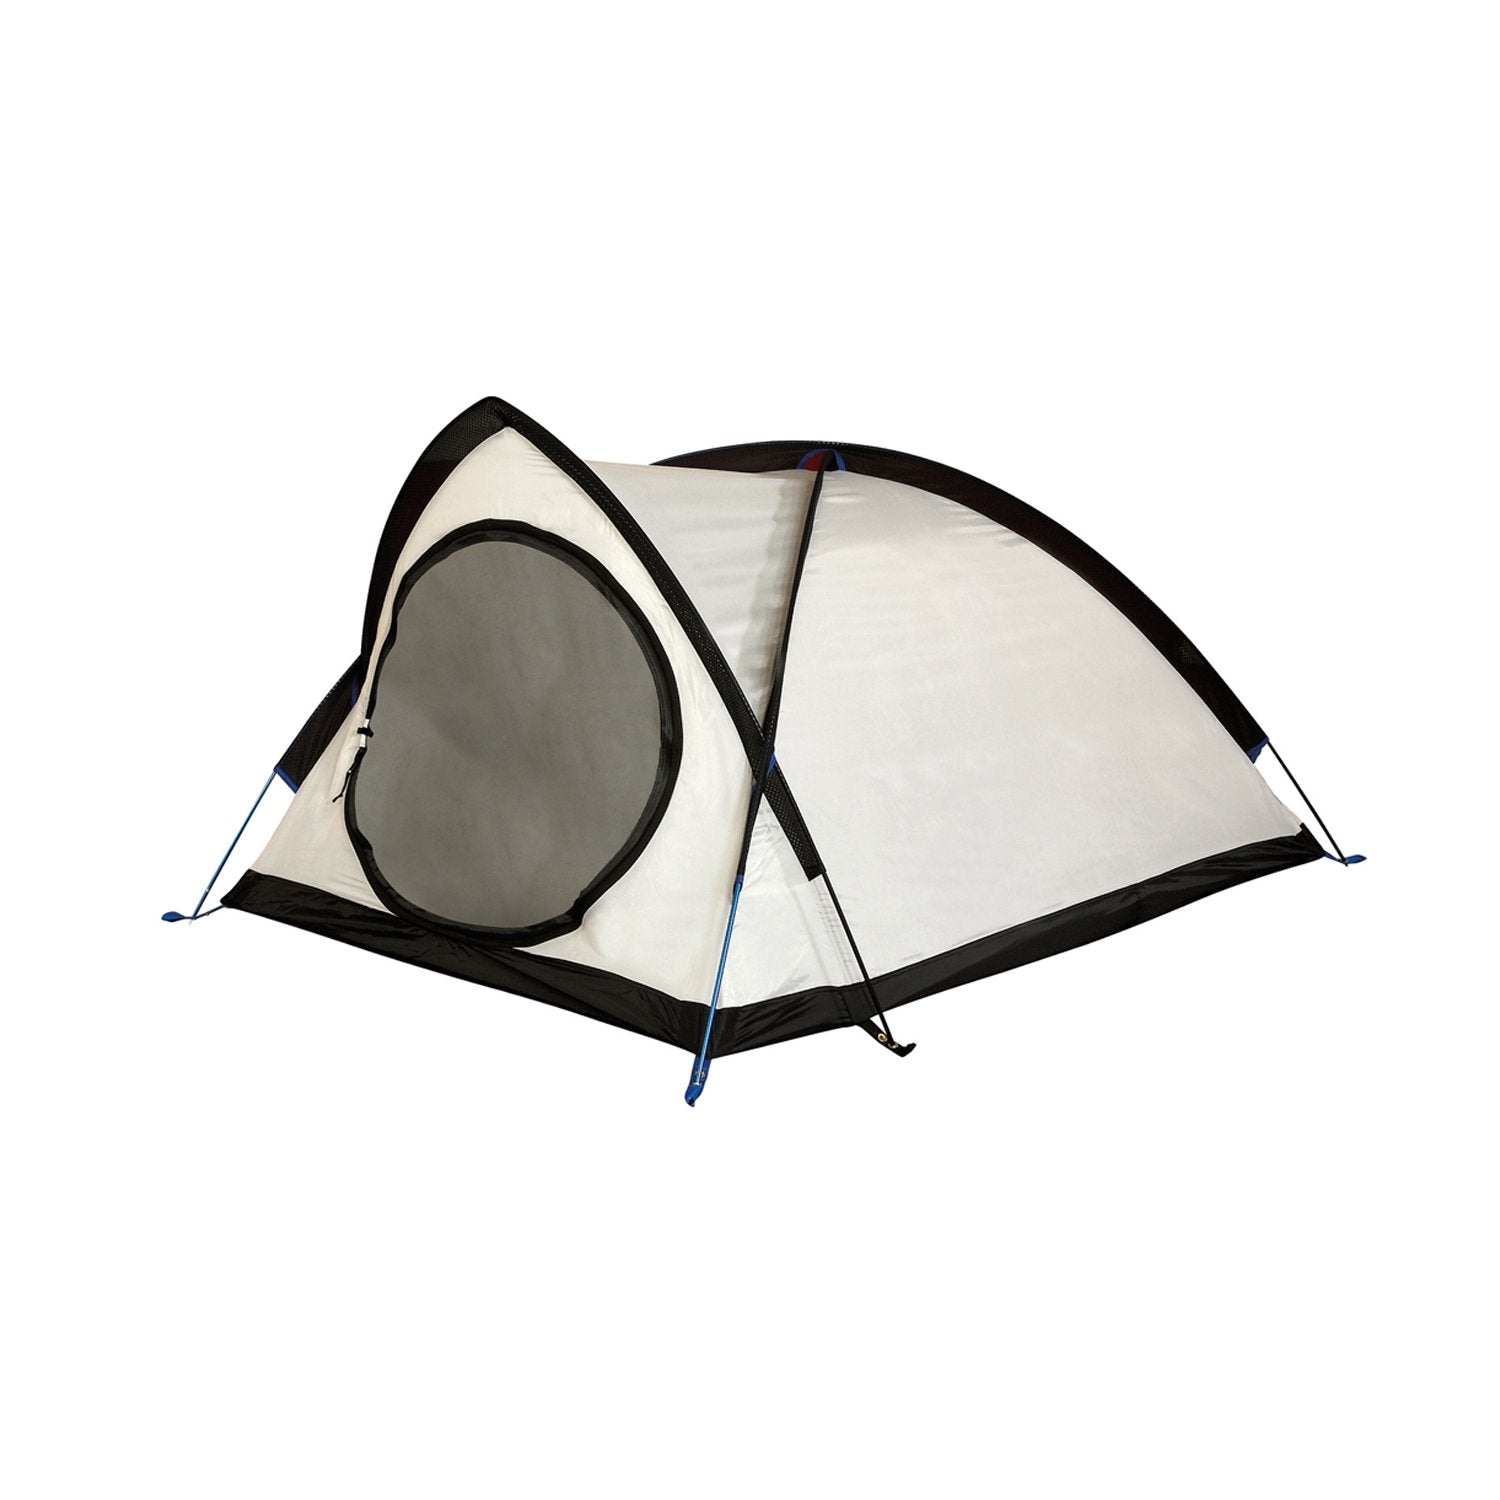 Wild Country Trisar 3 Tent - 3 Man Semi-Geodesic Tent